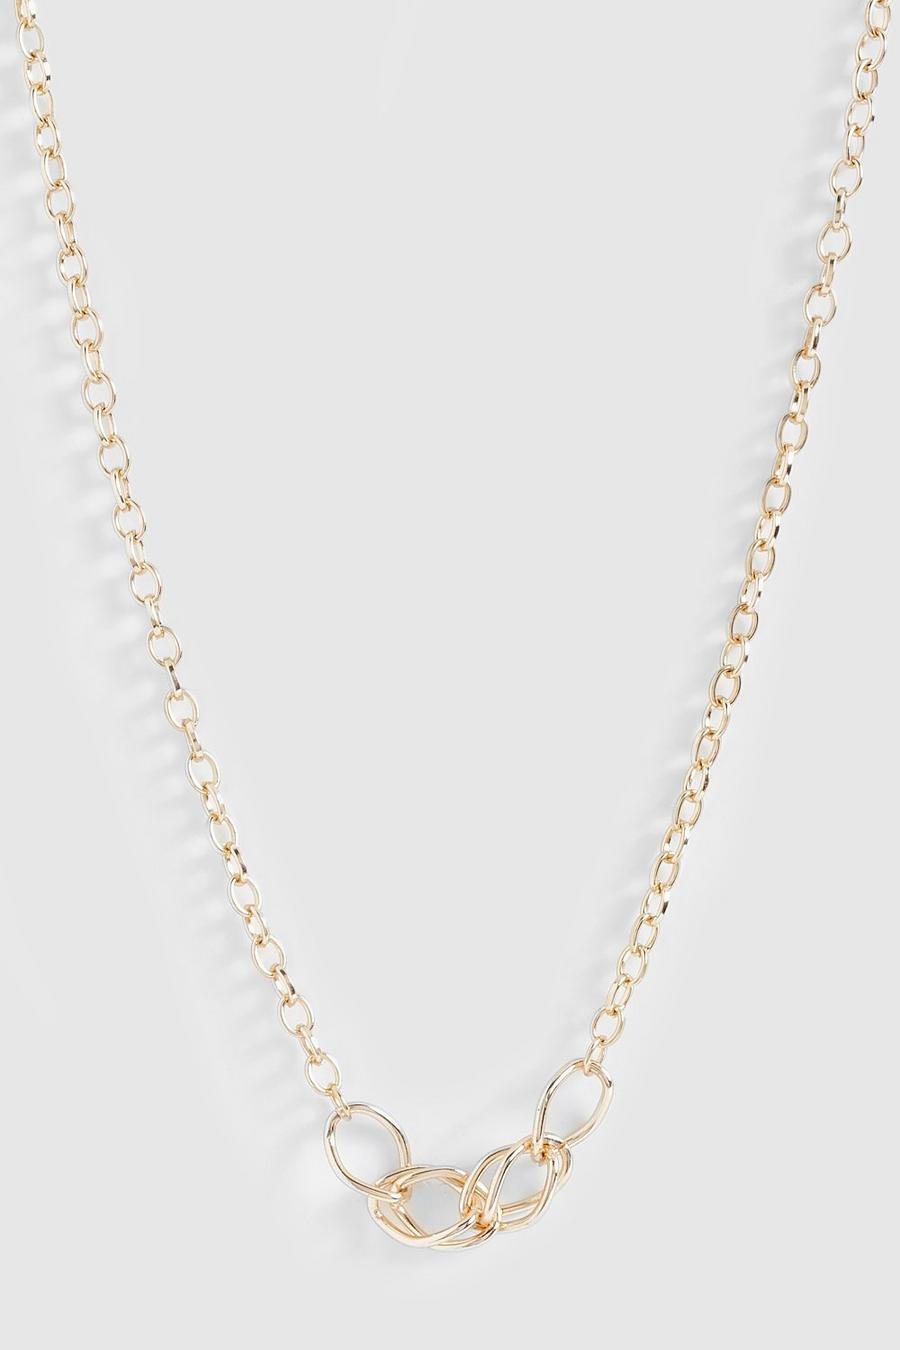 Gold metallic Link Chain Necklace 